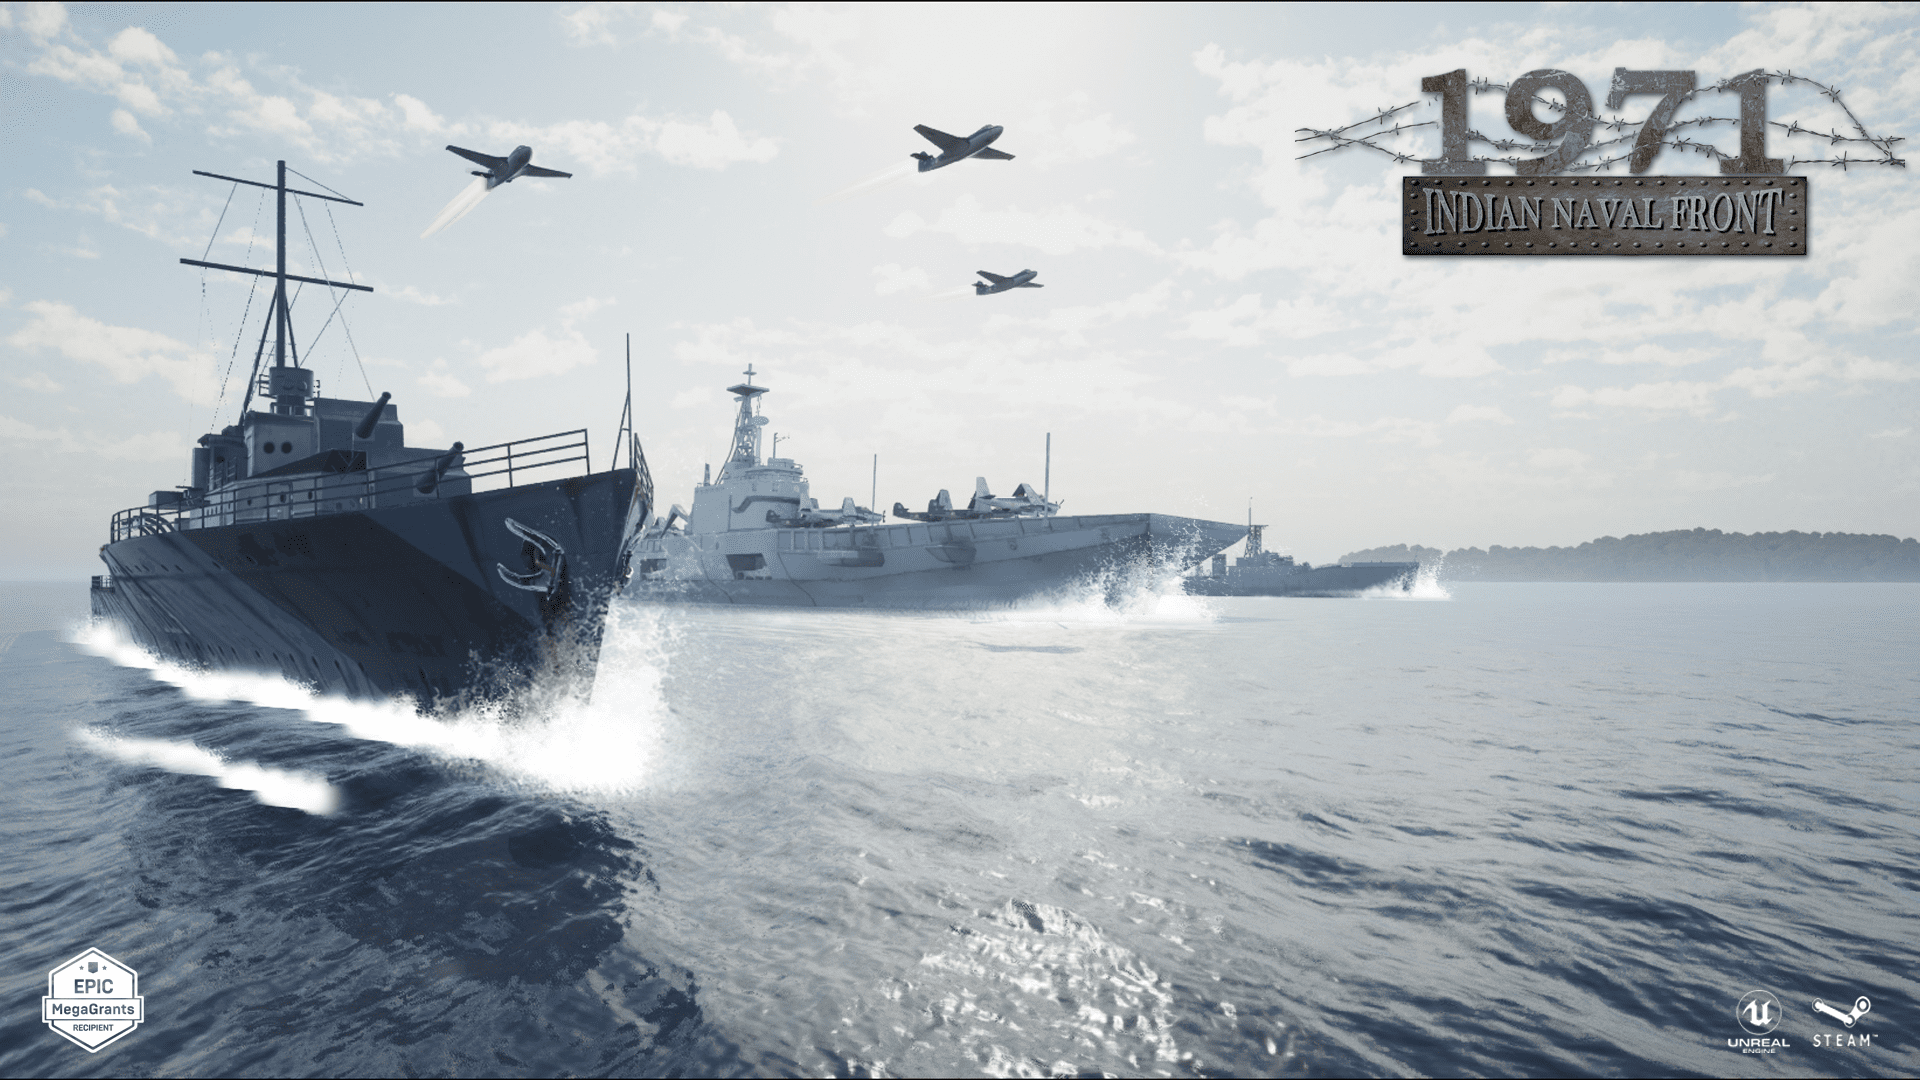 Indian Naval Front - Immerse yourself in the greatest naval warfare since World War II